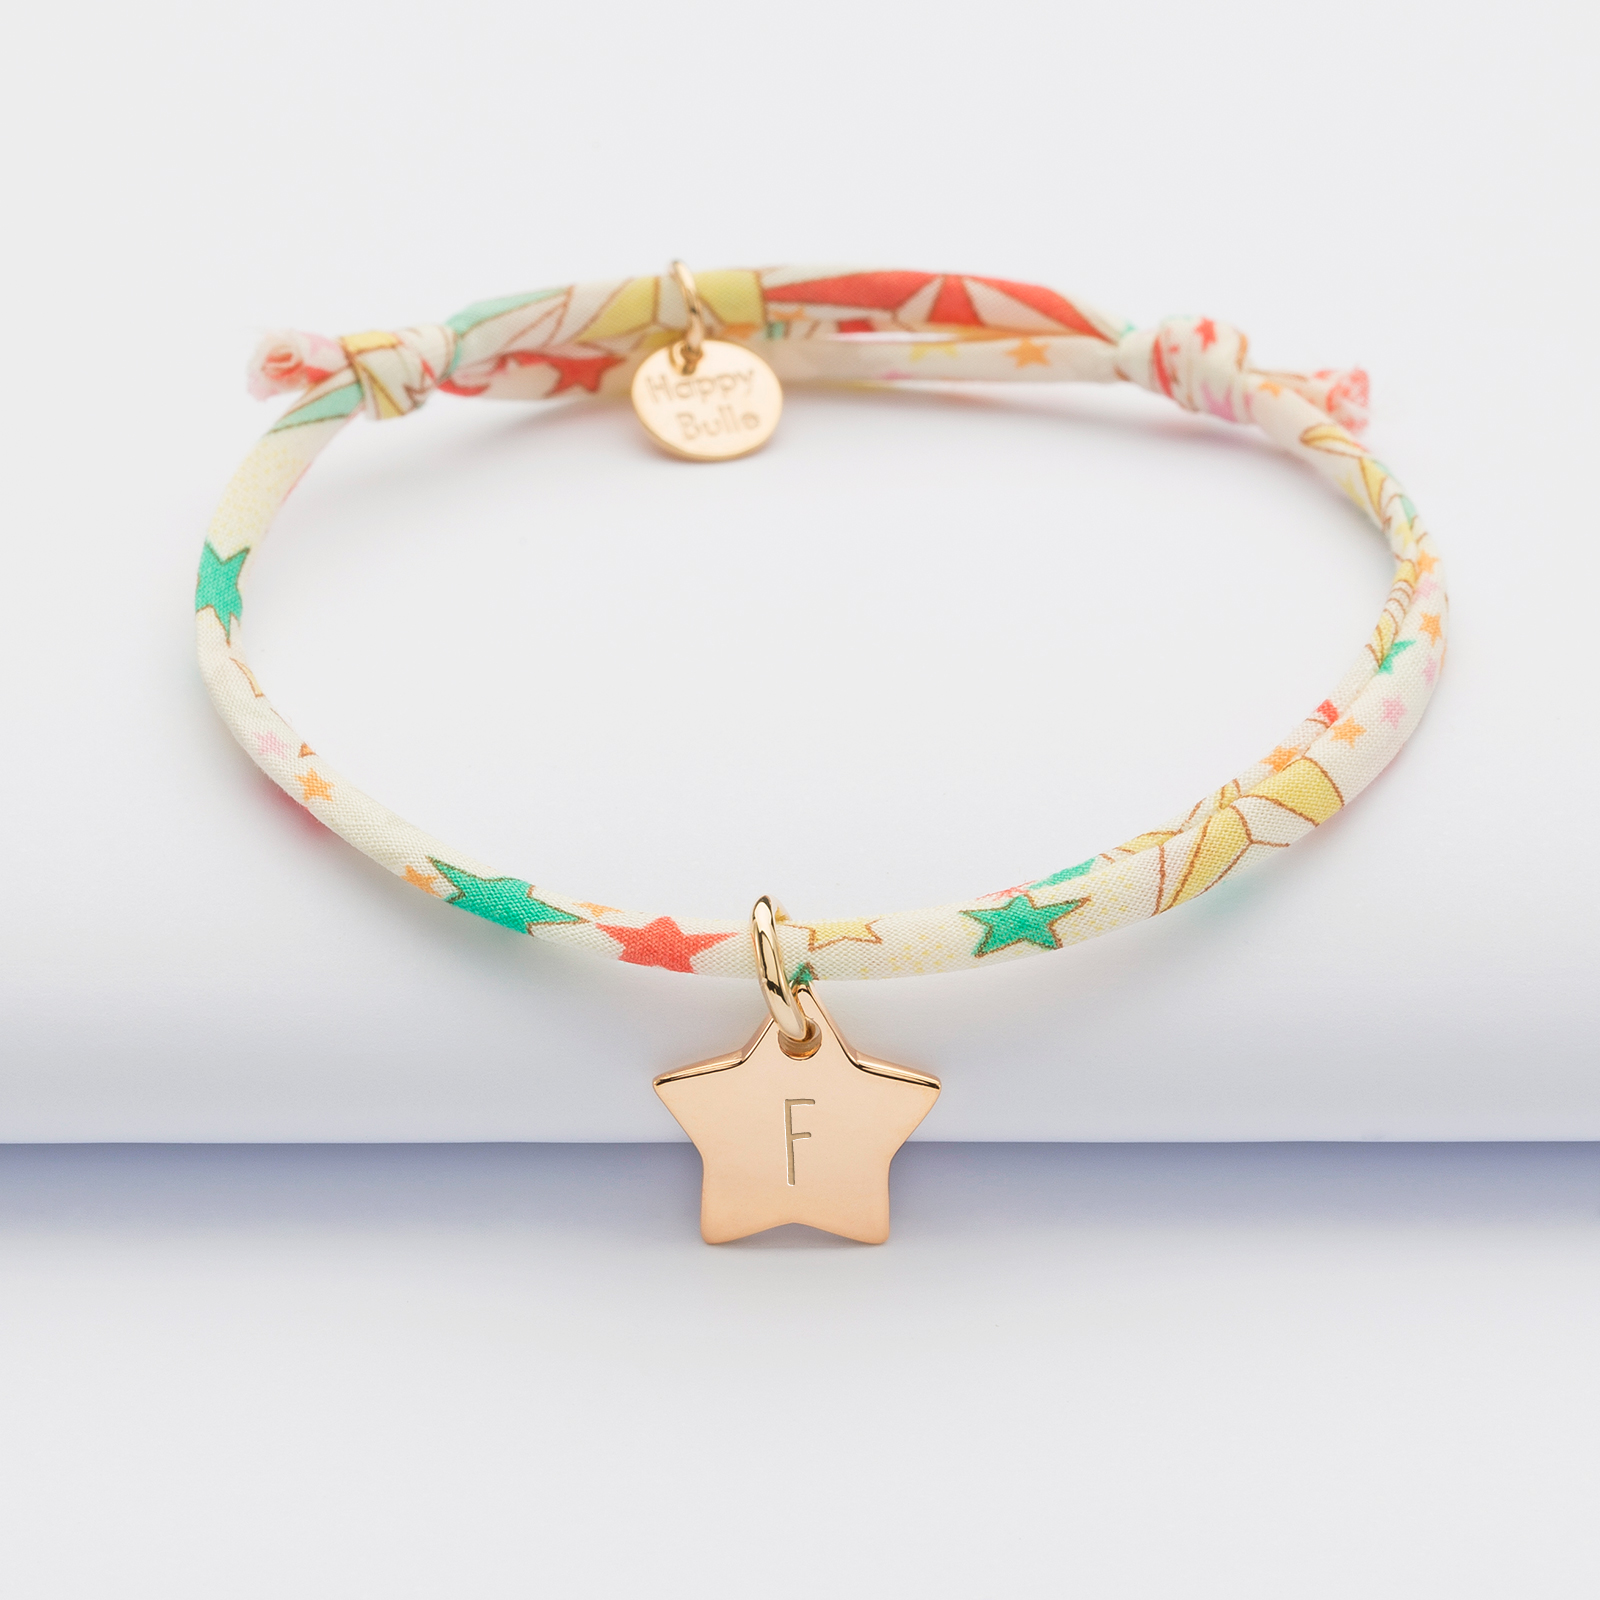 Personalised children's engraved initial gold-plated star medallion Liberty bracelet 12 mm - 1